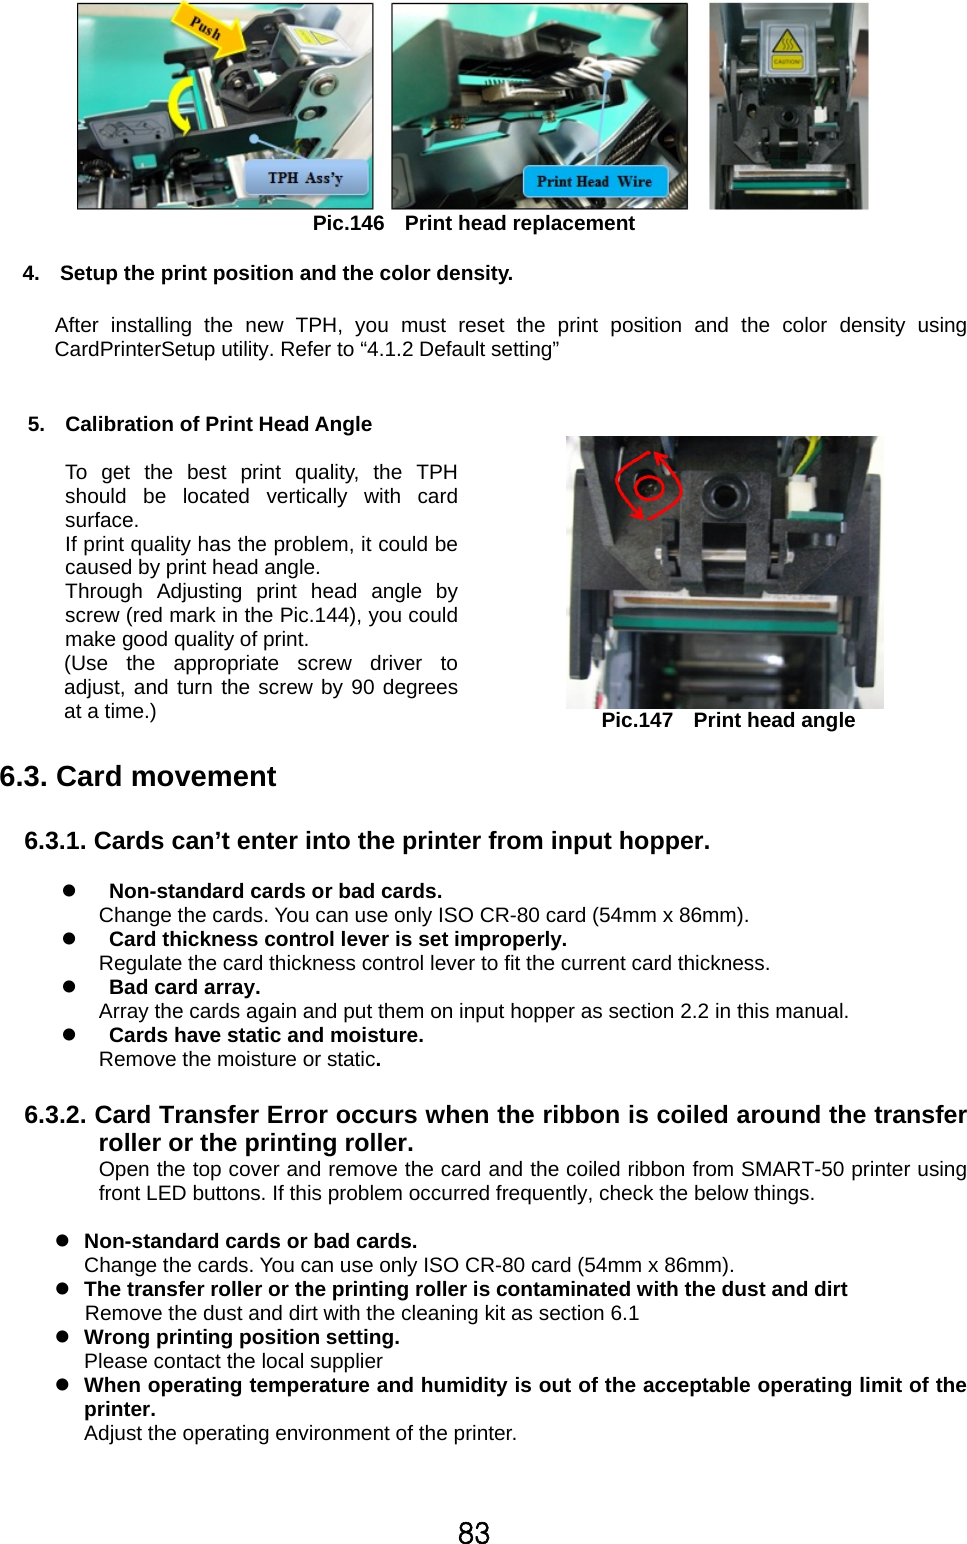 83  Pic.146  Print head replacement  4.  Setup the print position and the color density.    After installing the new TPH, you must reset the print position and the color density using CardPrinterSetup utility. Refer to “4.1.2 Default setting”     5.  Calibration of Print Head Angle  To get the best print quality, the TPHshould be located vertically with cardsurface.   If print quality has the problem, it could becaused by print head angle.   Through Adjusting print head angle byscrew (red mark in the Pic.144), you couldmake good quality of print.       (Use  the  appropriate  screw  driver  toadjust, and turn the screw by 90 degreesat a time.)     Pic.147  Print head angle  6.3. Card movement  6.3.1. Cards can’t enter into the printer from input hopper.   z   Non-standard cards or bad cards. Change the cards. You can use only ISO CR-80 card (54mm x 86mm). z   Card thickness control lever is set improperly.   Regulate the card thickness control lever to fit the current card thickness. z   Bad card array. Array the cards again and put them on input hopper as section 2.2 in this manual. z   Cards have static and moisture.   Remove the moisture or static.  6.3.2. Card Transfer Error occurs when the ribbon is coiled around the transfer roller or the printing roller. Open the top cover and remove the card and the coiled ribbon from SMART-50 printer using front LED buttons. If this problem occurred frequently, check the below things.  z Non-standard cards or bad cards. Change the cards. You can use only ISO CR-80 card (54mm x 86mm). z The transfer roller or the printing roller is contaminated with the dust and dirt Remove the dust and dirt with the cleaning kit as section 6.1 z Wrong printing position setting.   Please contact the local supplier z When operating temperature and humidity is out of the acceptable operating limit of the printer.  Adjust the operating environment of the printer.   